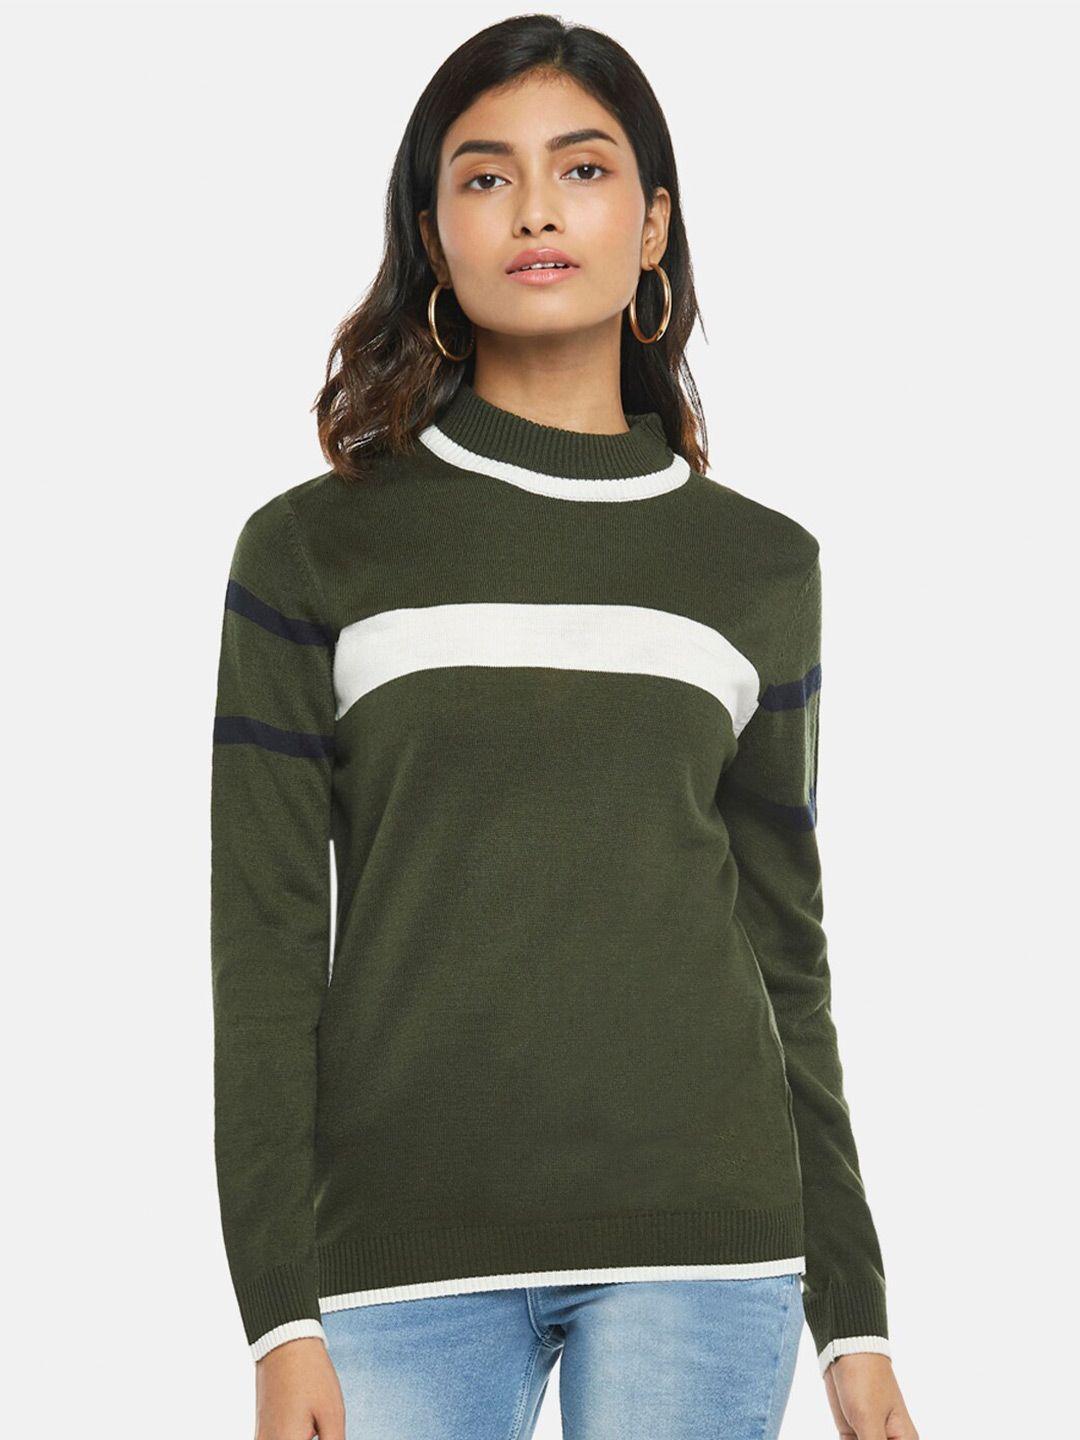 honey by pantaloons women olive green & white striped pullover